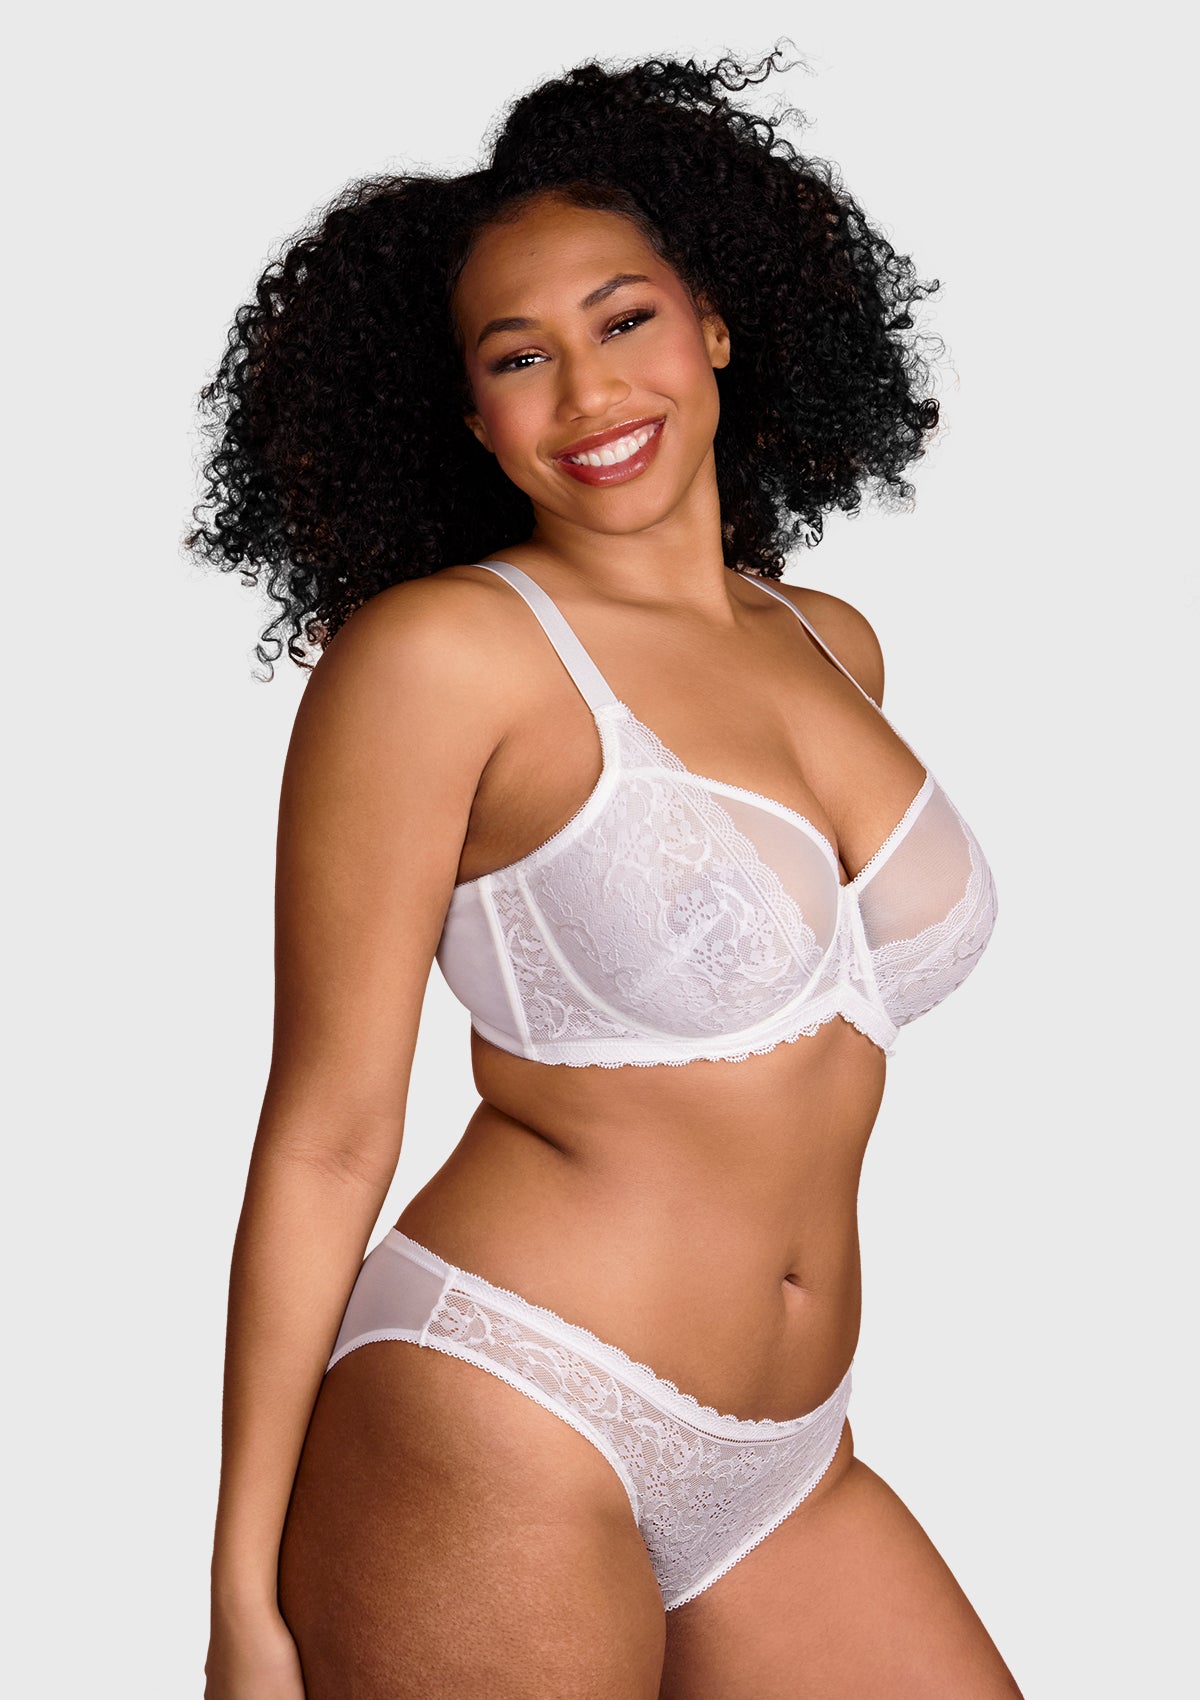 HSIA Anemone Big Bra: Best Bra For Lift And Support, Floral Bra - Burgundy / 34 / D